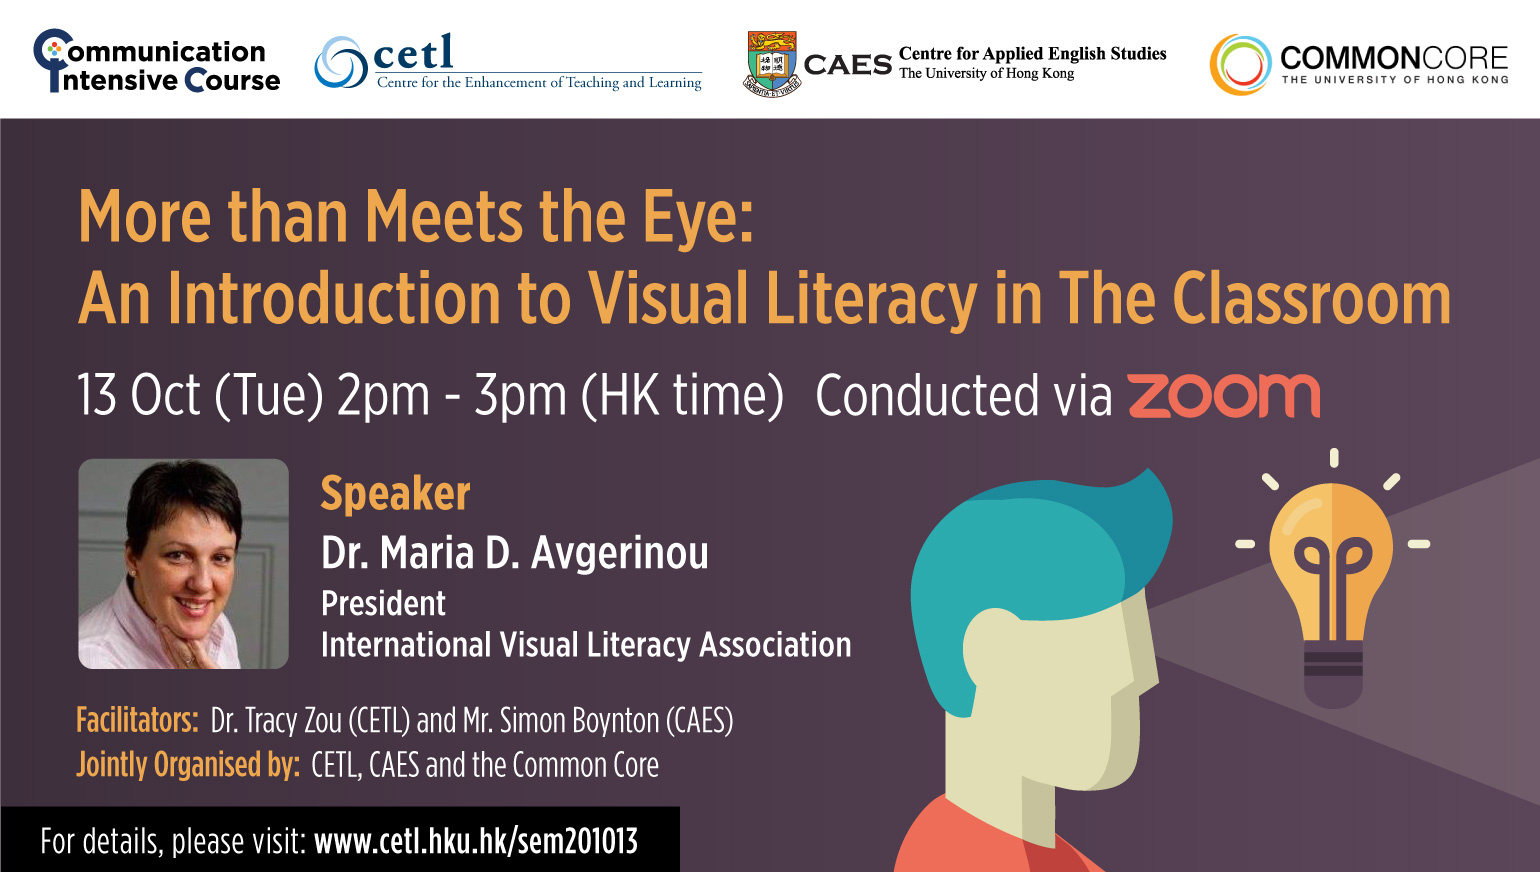 An Introduction to Visual Literacy in The Classroom